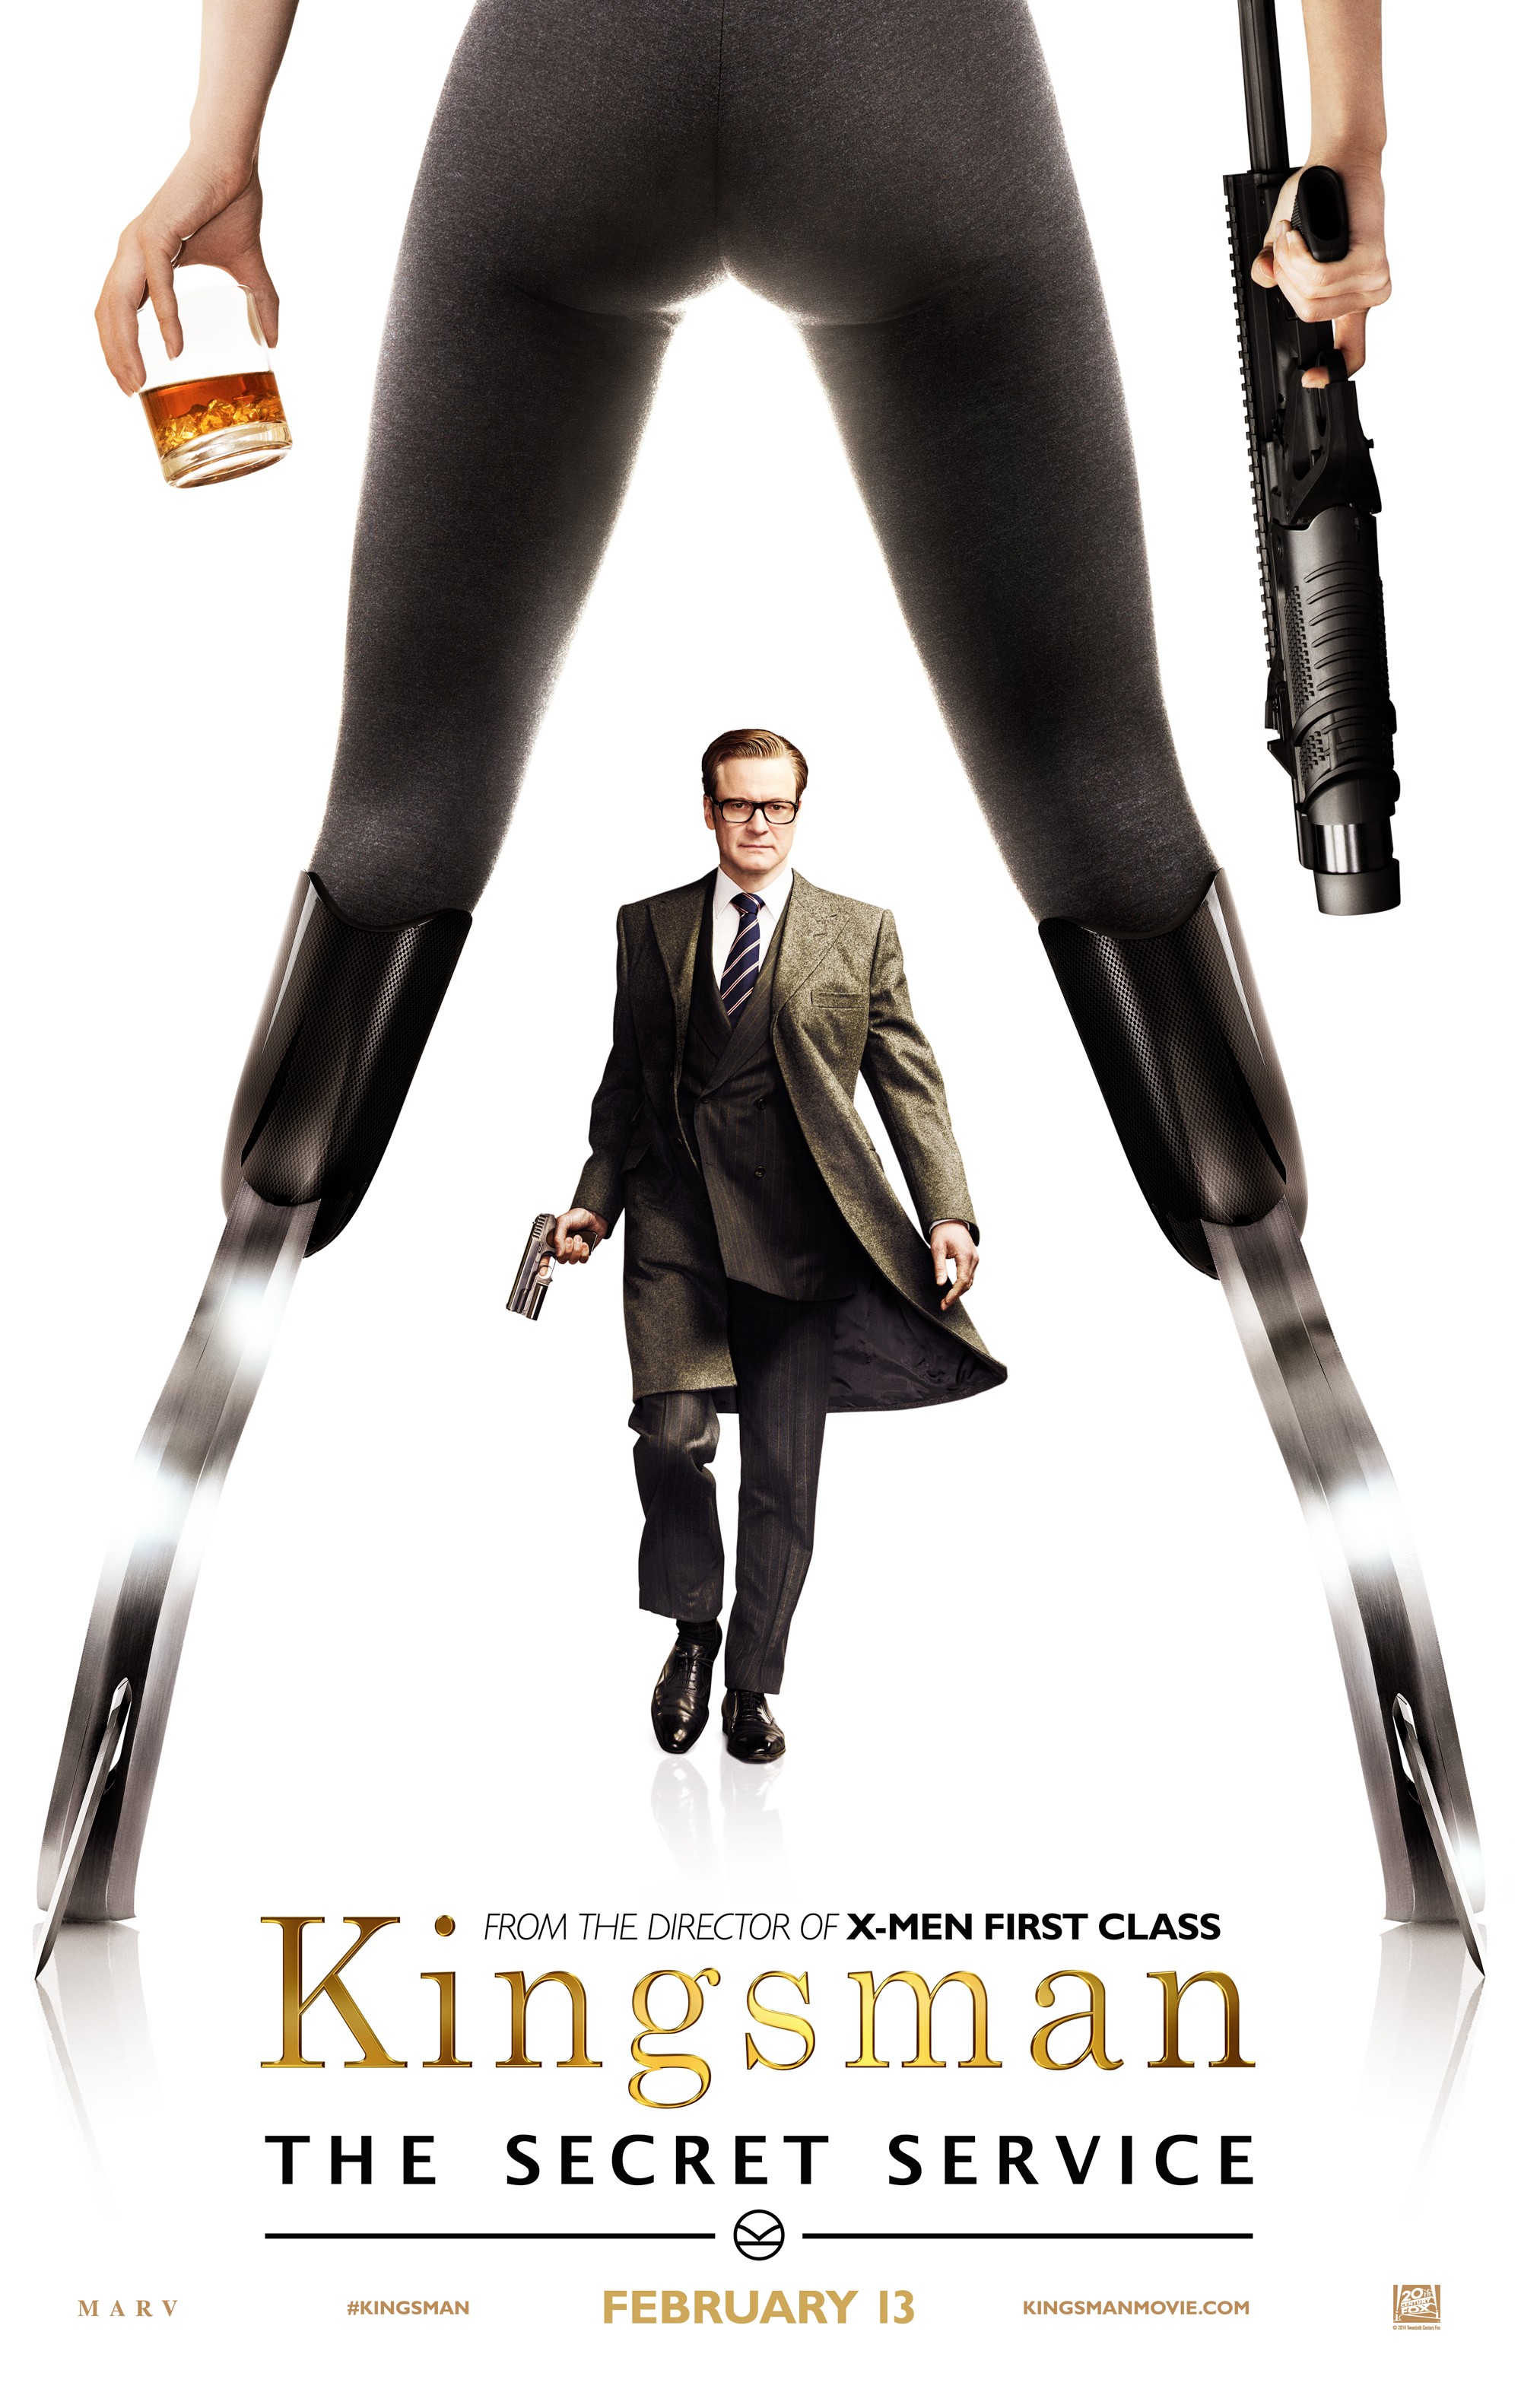 Kingsman The Secret Service Trailer 1 Trailers And Videos Rotten Tomatoes